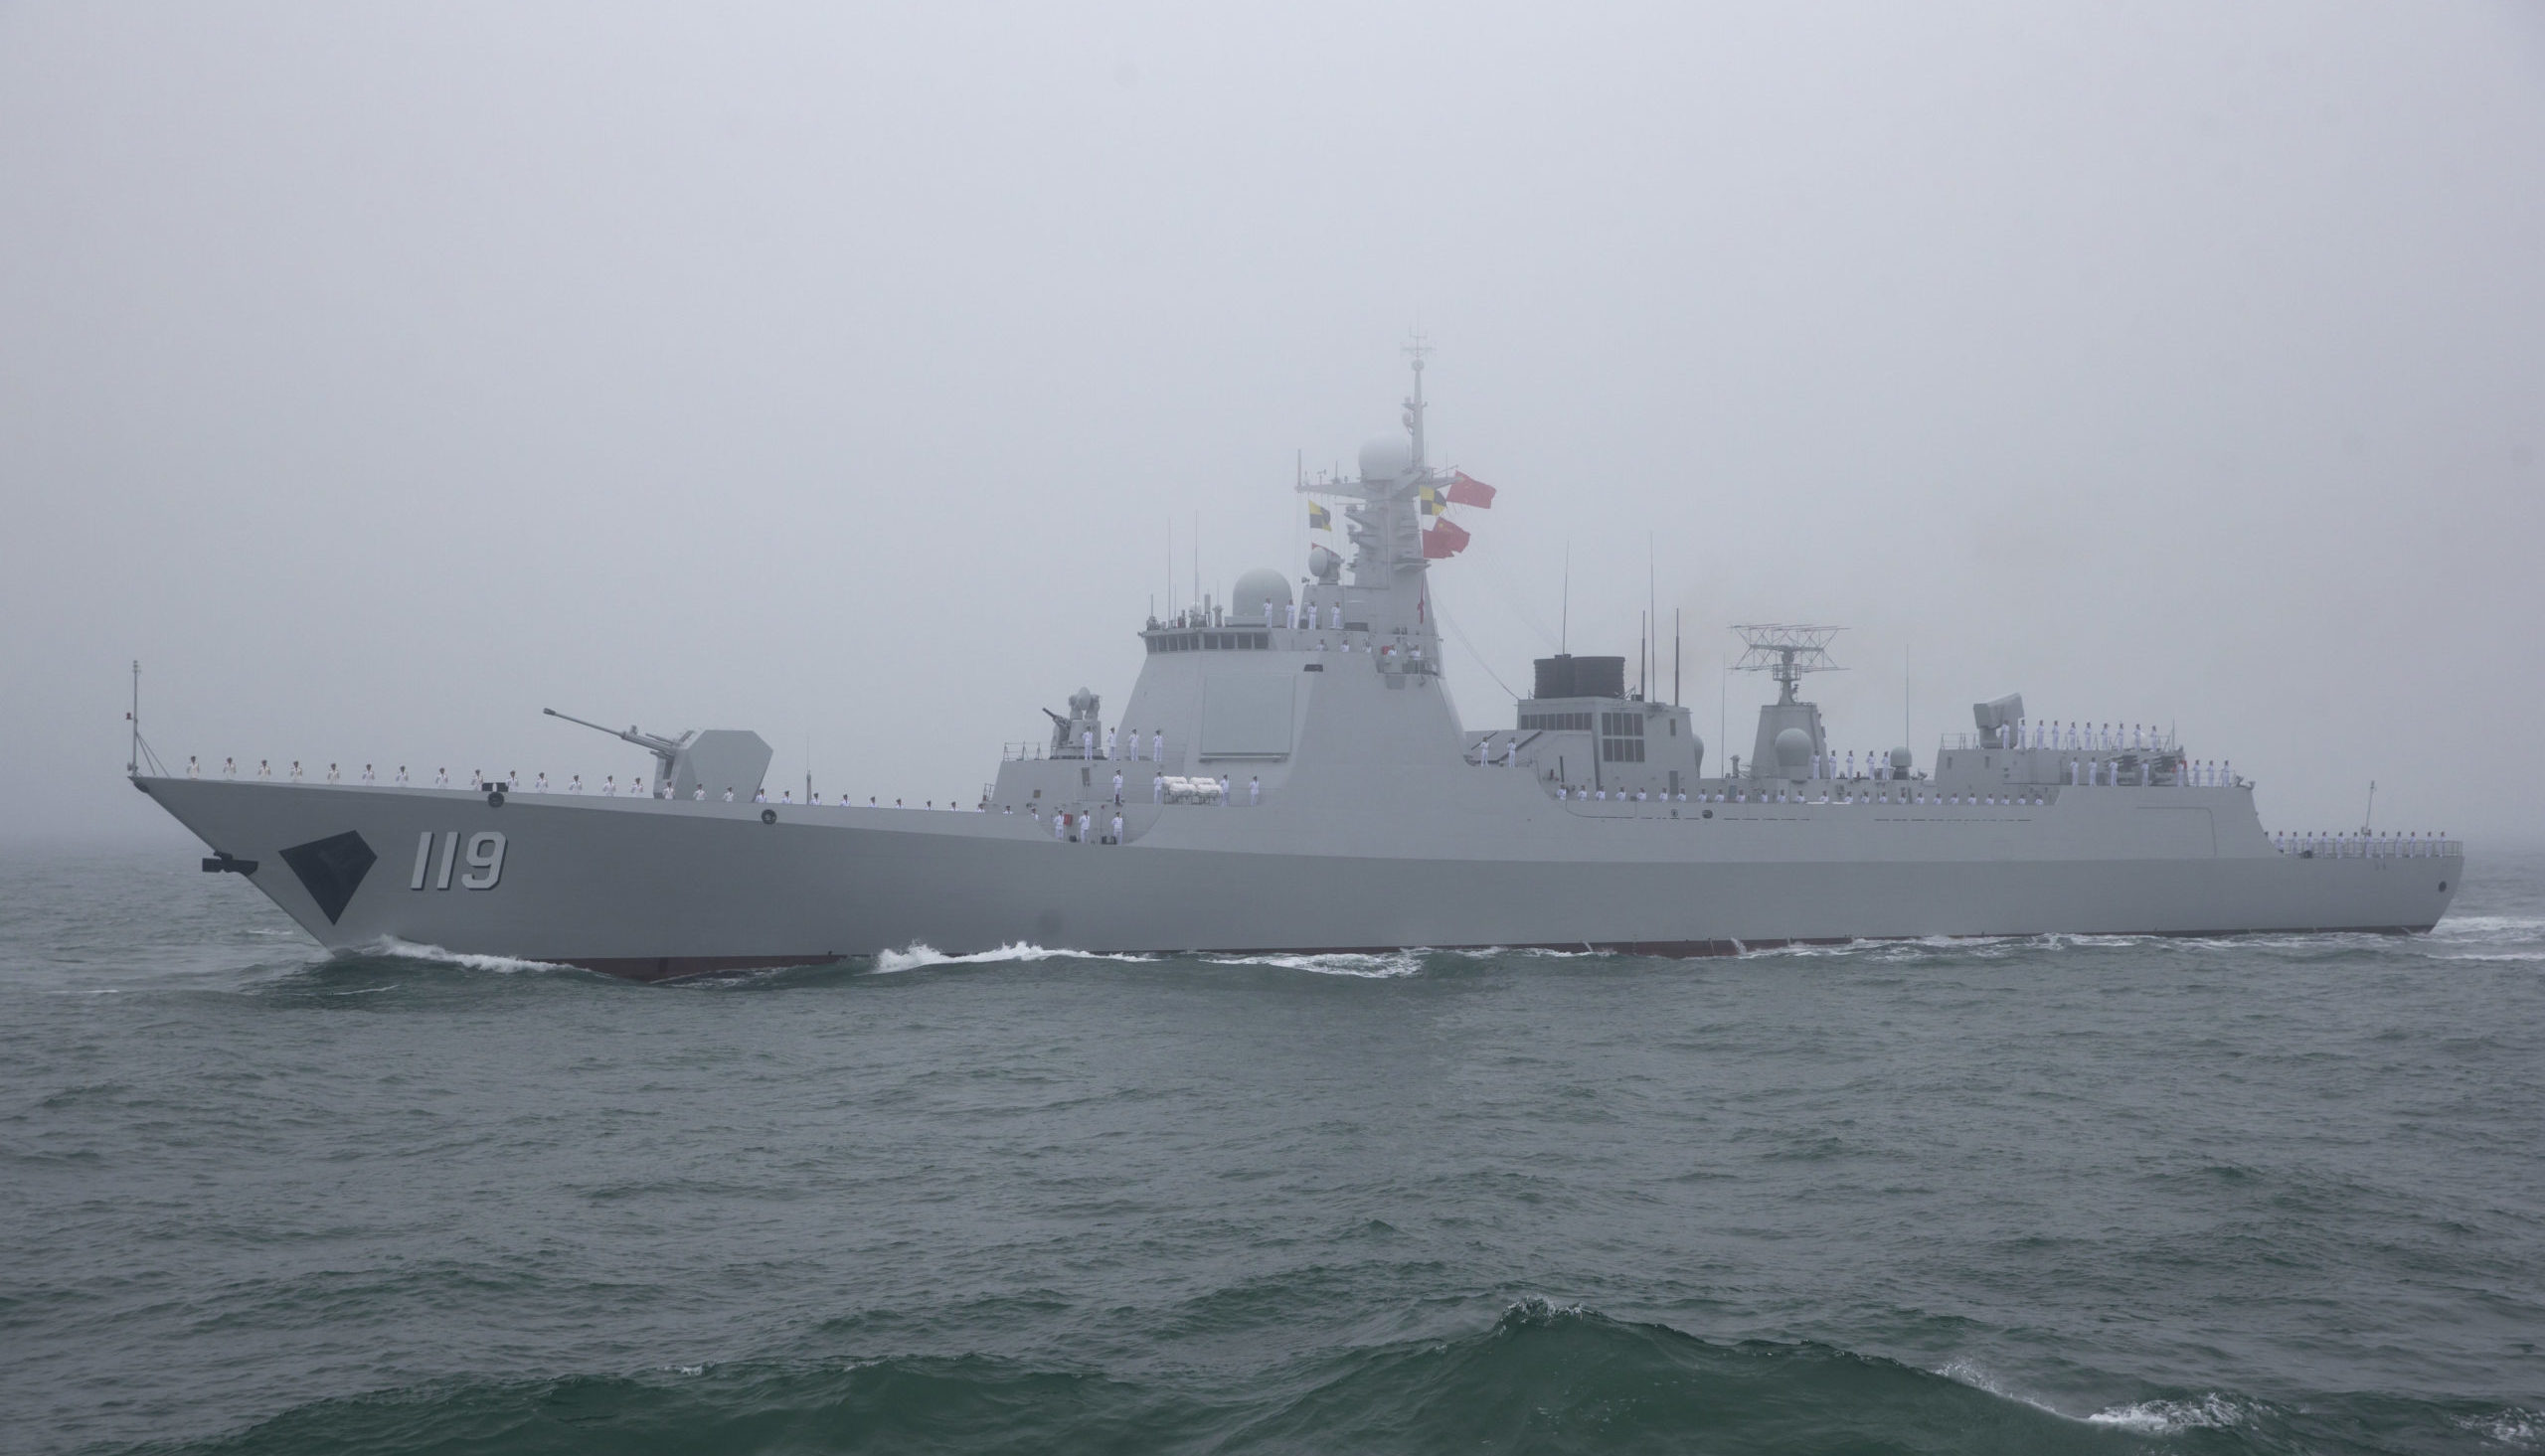 The type 052D guided missile destroyer Guiyang of the Chinese People's Liberation Army (PLA) Navy participates in a naval parade to commemorate the 70th anniversary of the founding of China's PLA Navy in the sea near Qingdao, in eastern China's Shandong province on April 23, 2019. (Photo by MARK SCHIEFELBEIN/AFP via Getty Images)